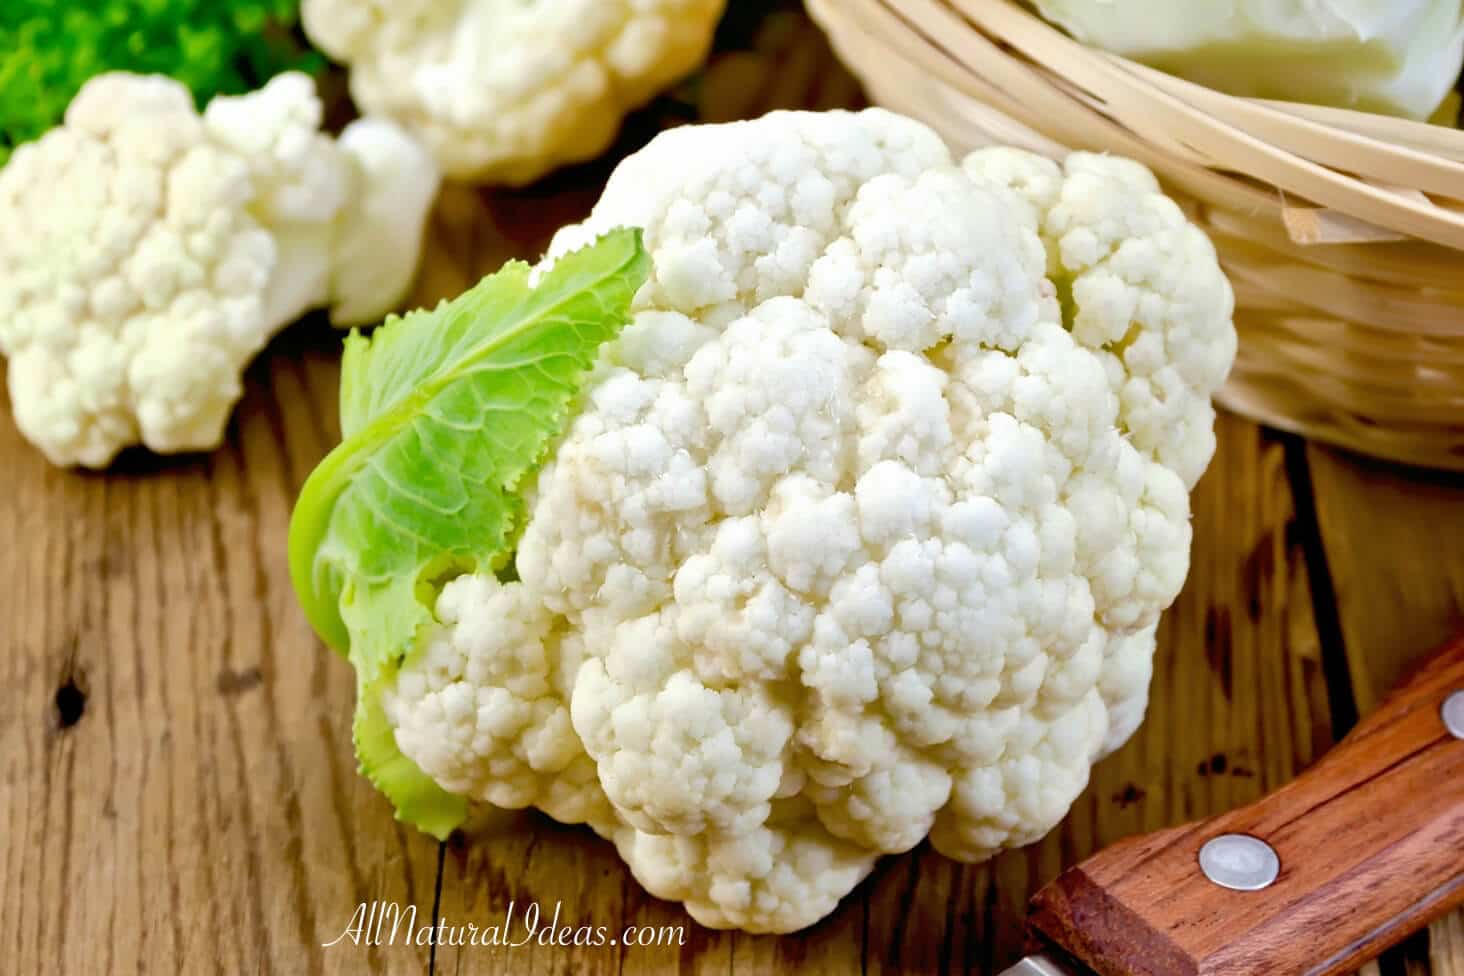 Cauliflower health benefits are plentiful. Here's a few reasons why you should be eating cauliflower along with 33 terrific low carb recipes.